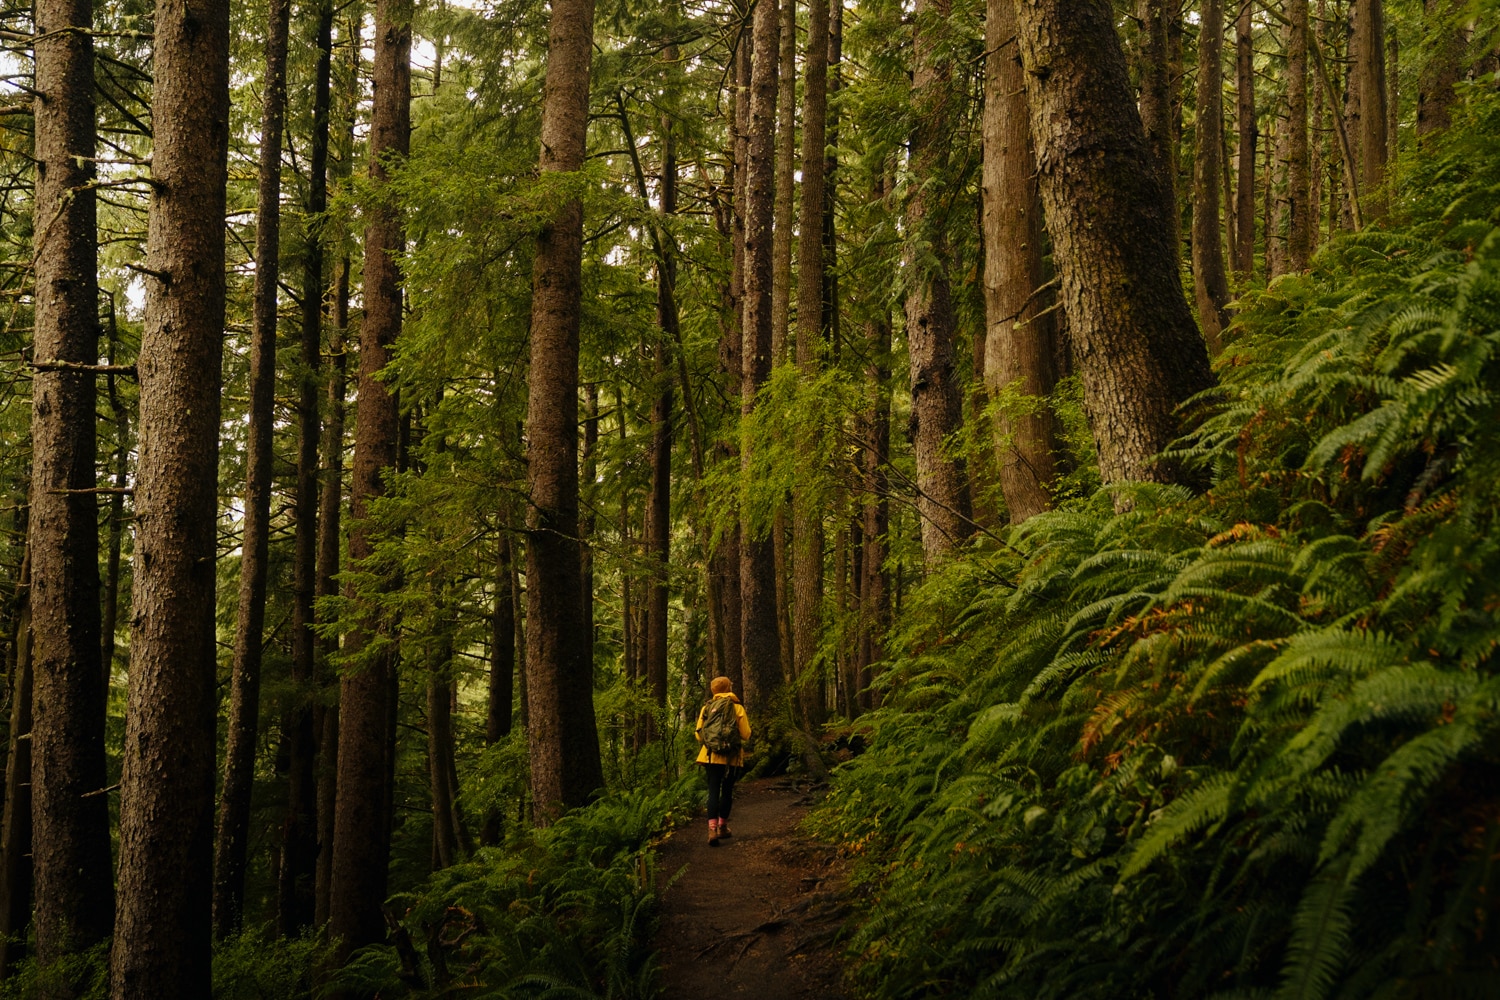 A girl in a yellow rain jacket is looking up at a tall spruce tree on the Cape Falcon trail in Oregon.